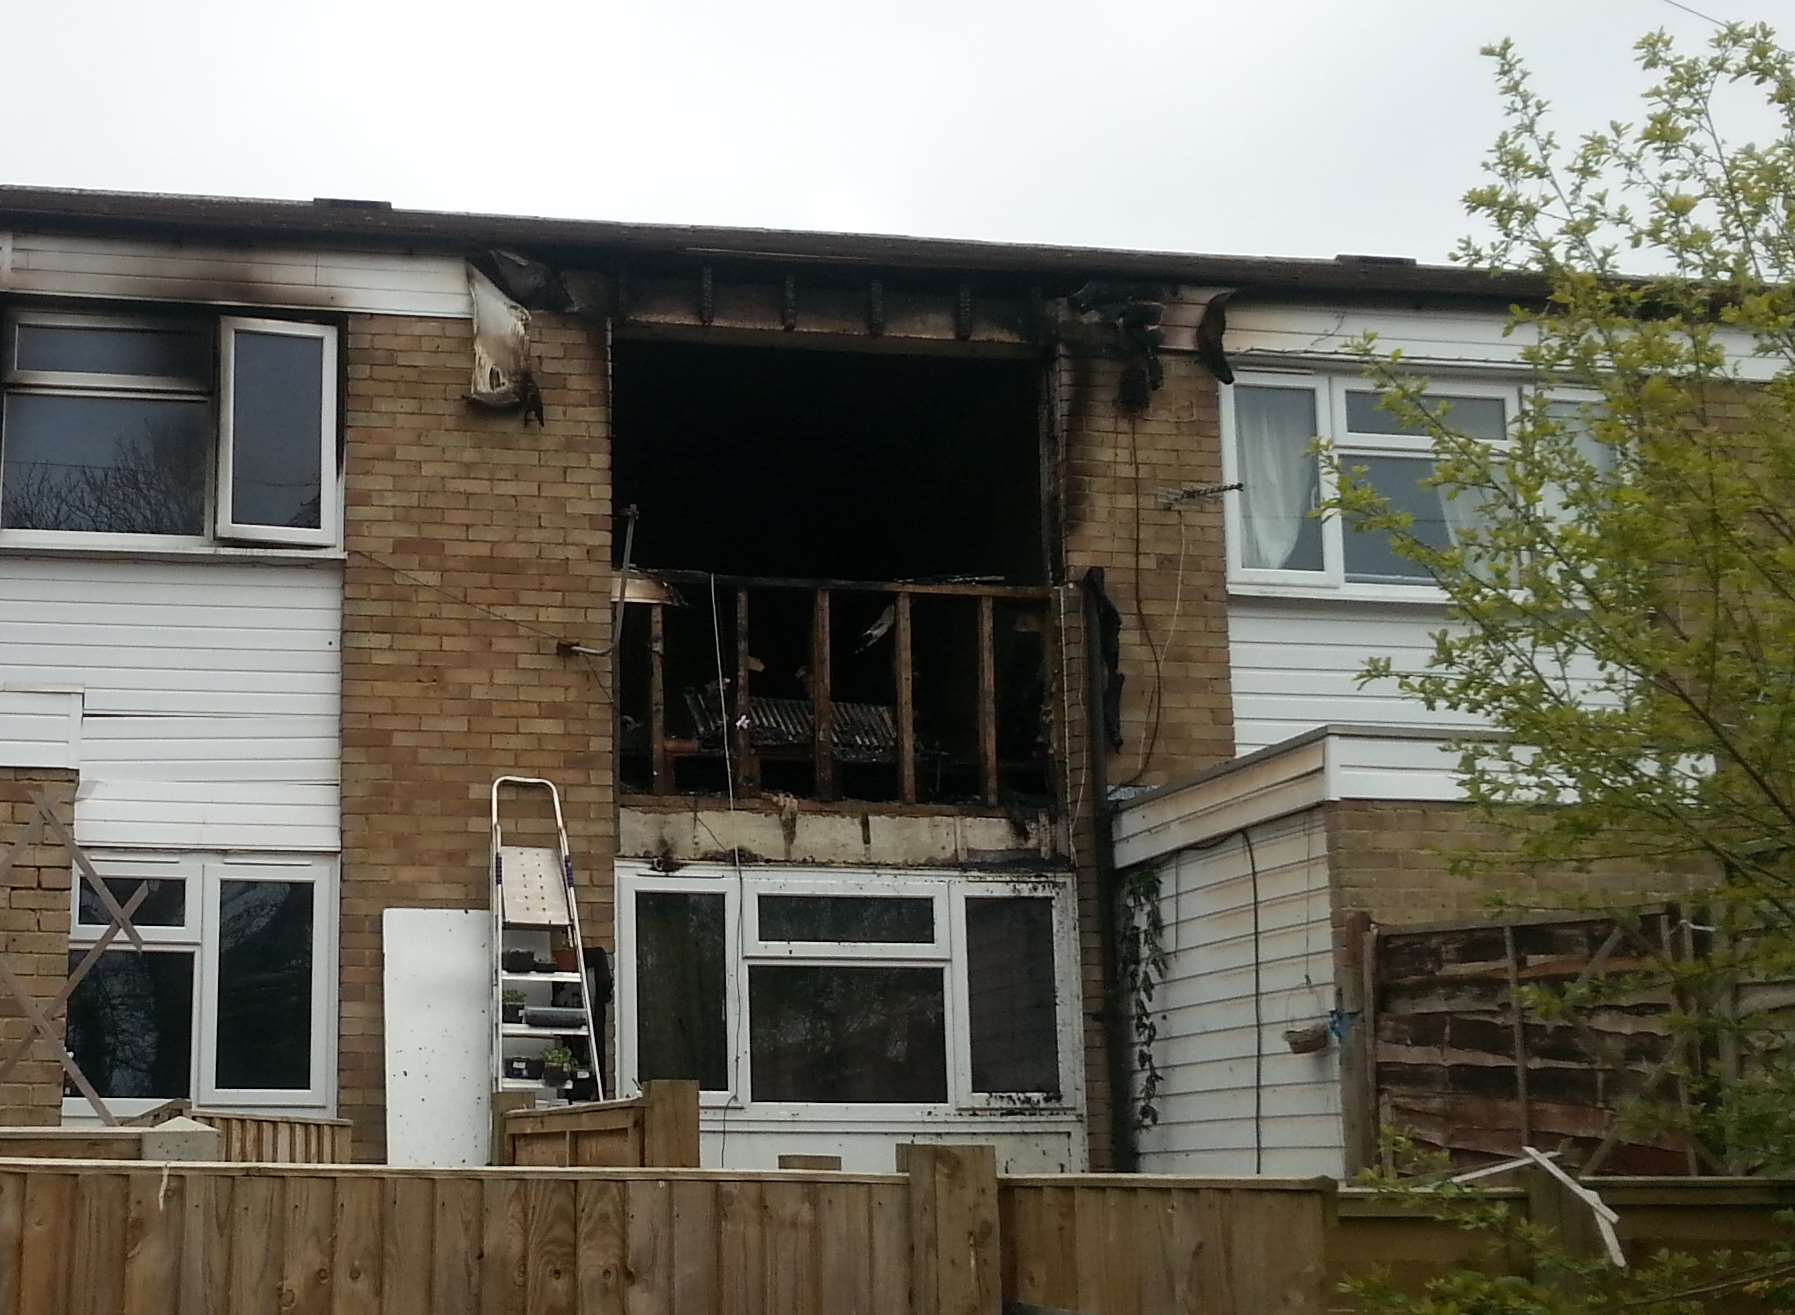 Fire damage to the terraced home